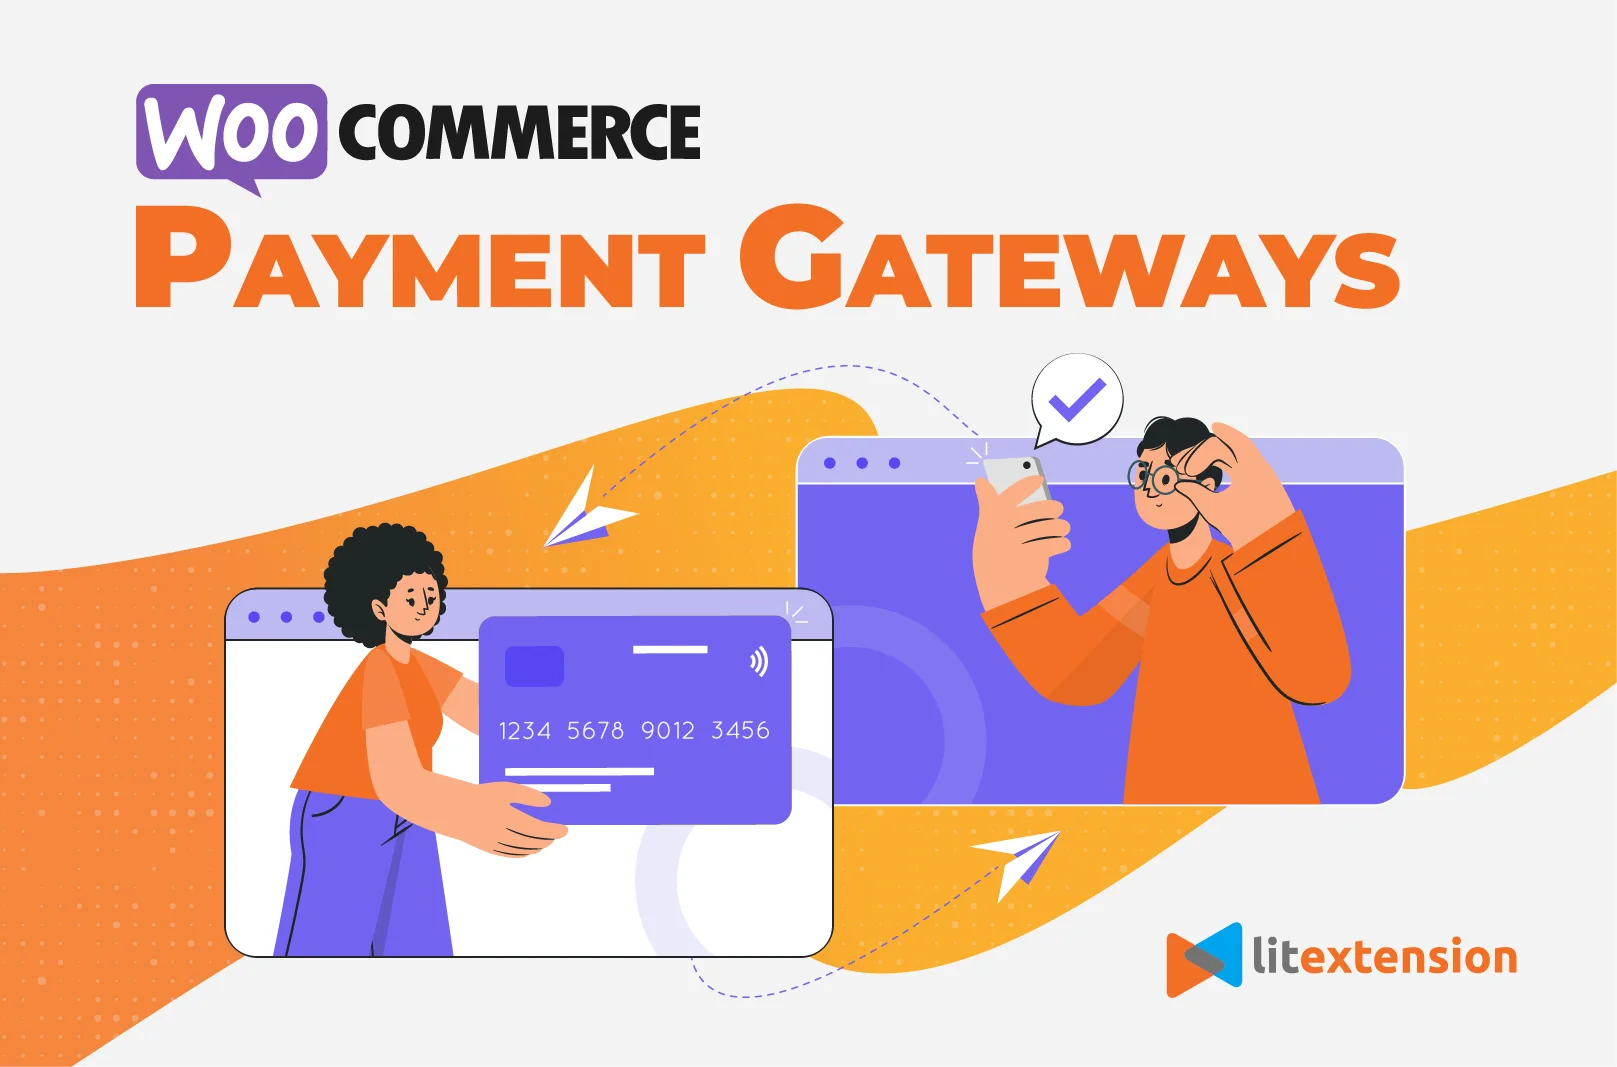 Buy now, pay later with WooPayments - WooCommerce